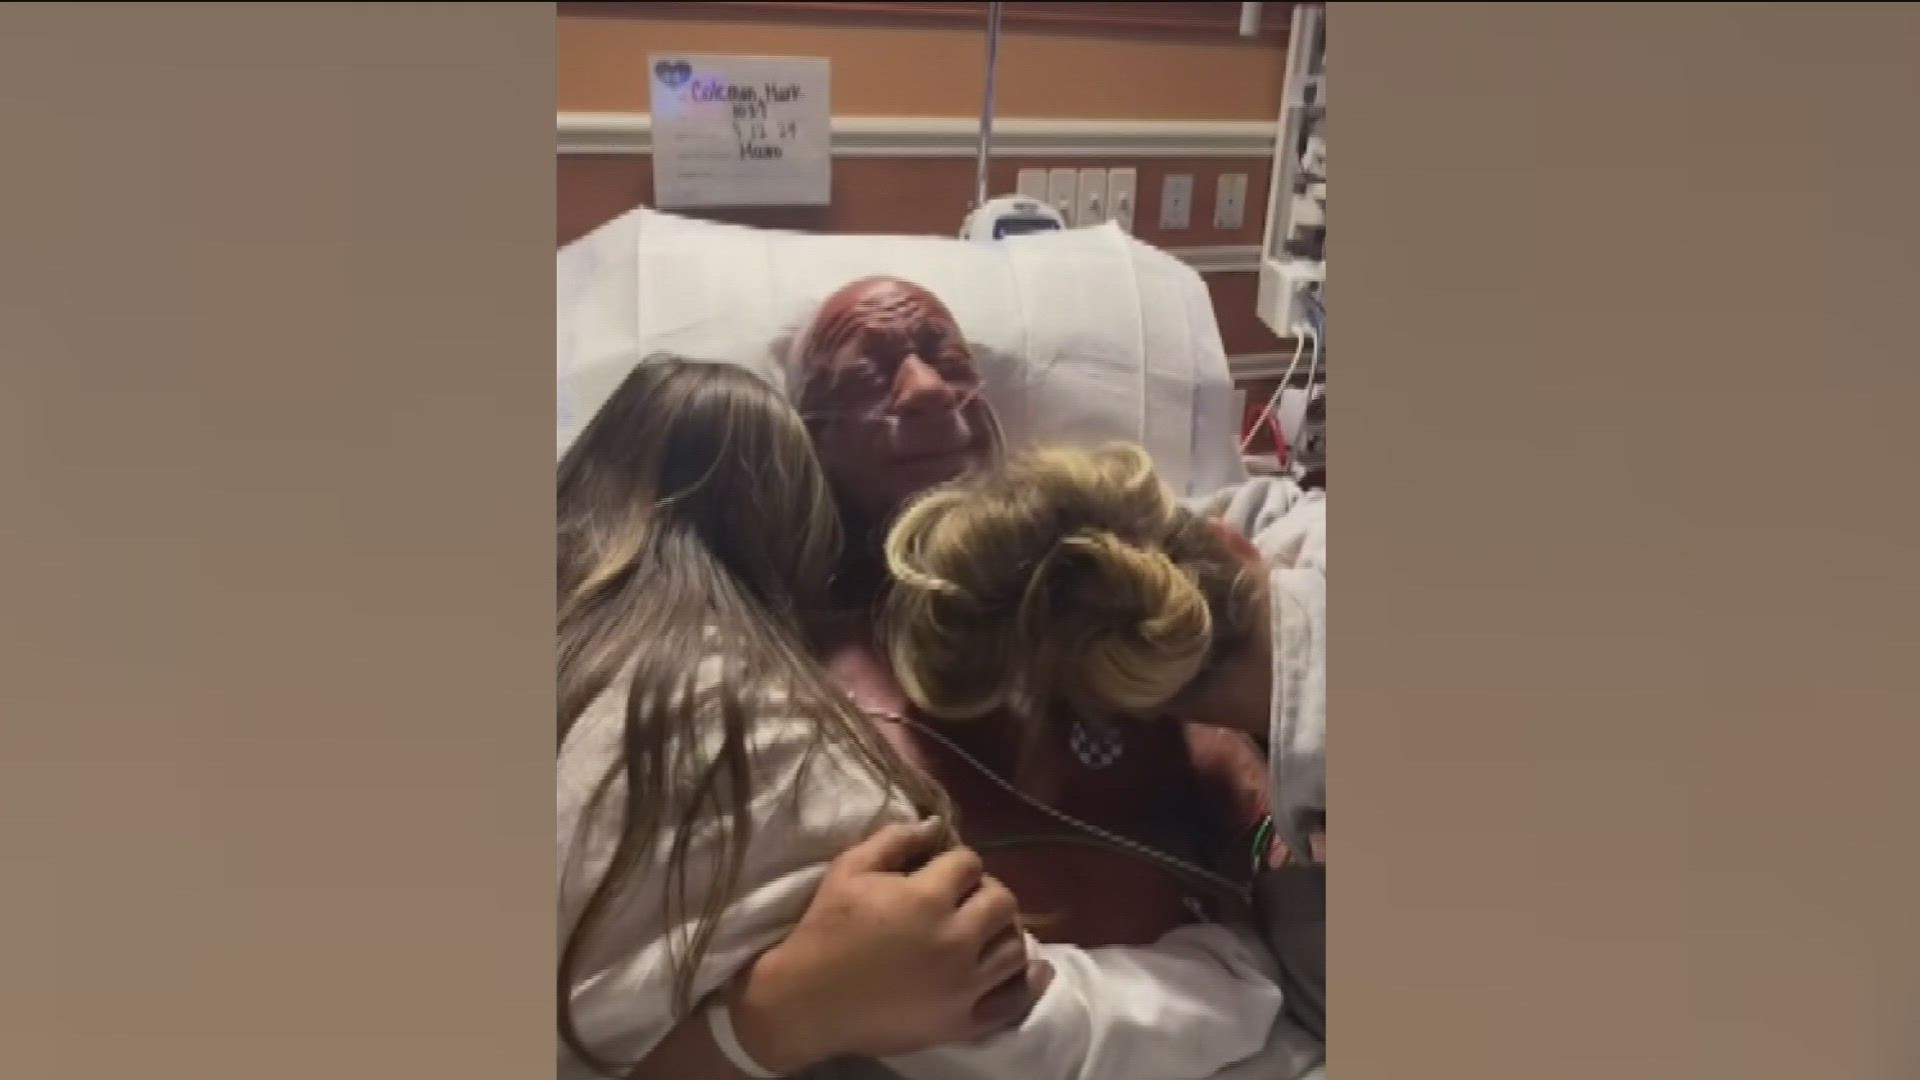 A video posted to Coleman's Instagram account shows him embracing members of his family from a hospital bed in an emotional scene.